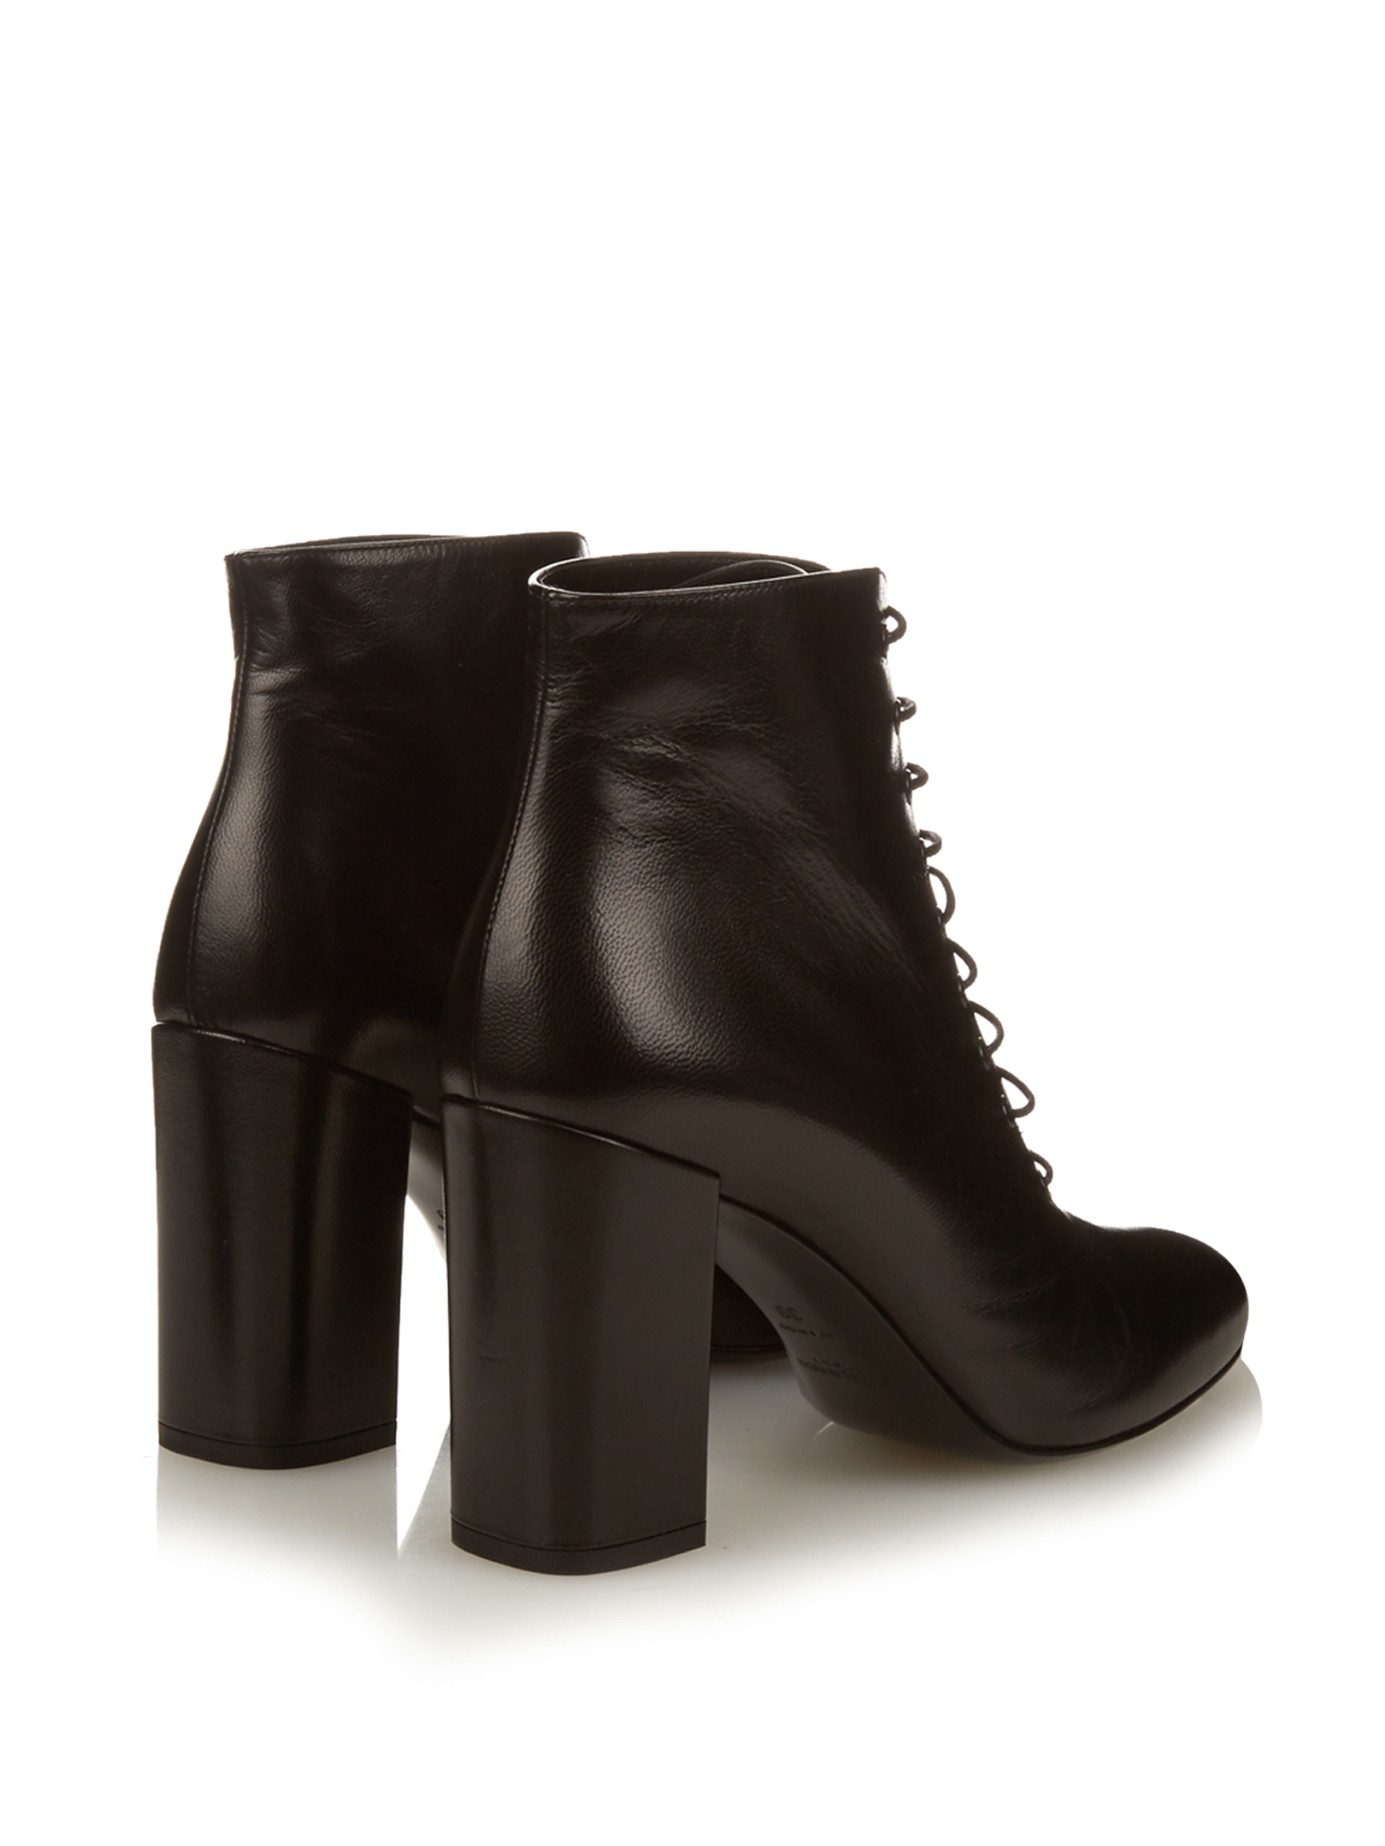 Saint Laurent Lace-Up Leather Ankle Boots in Black | Lyst